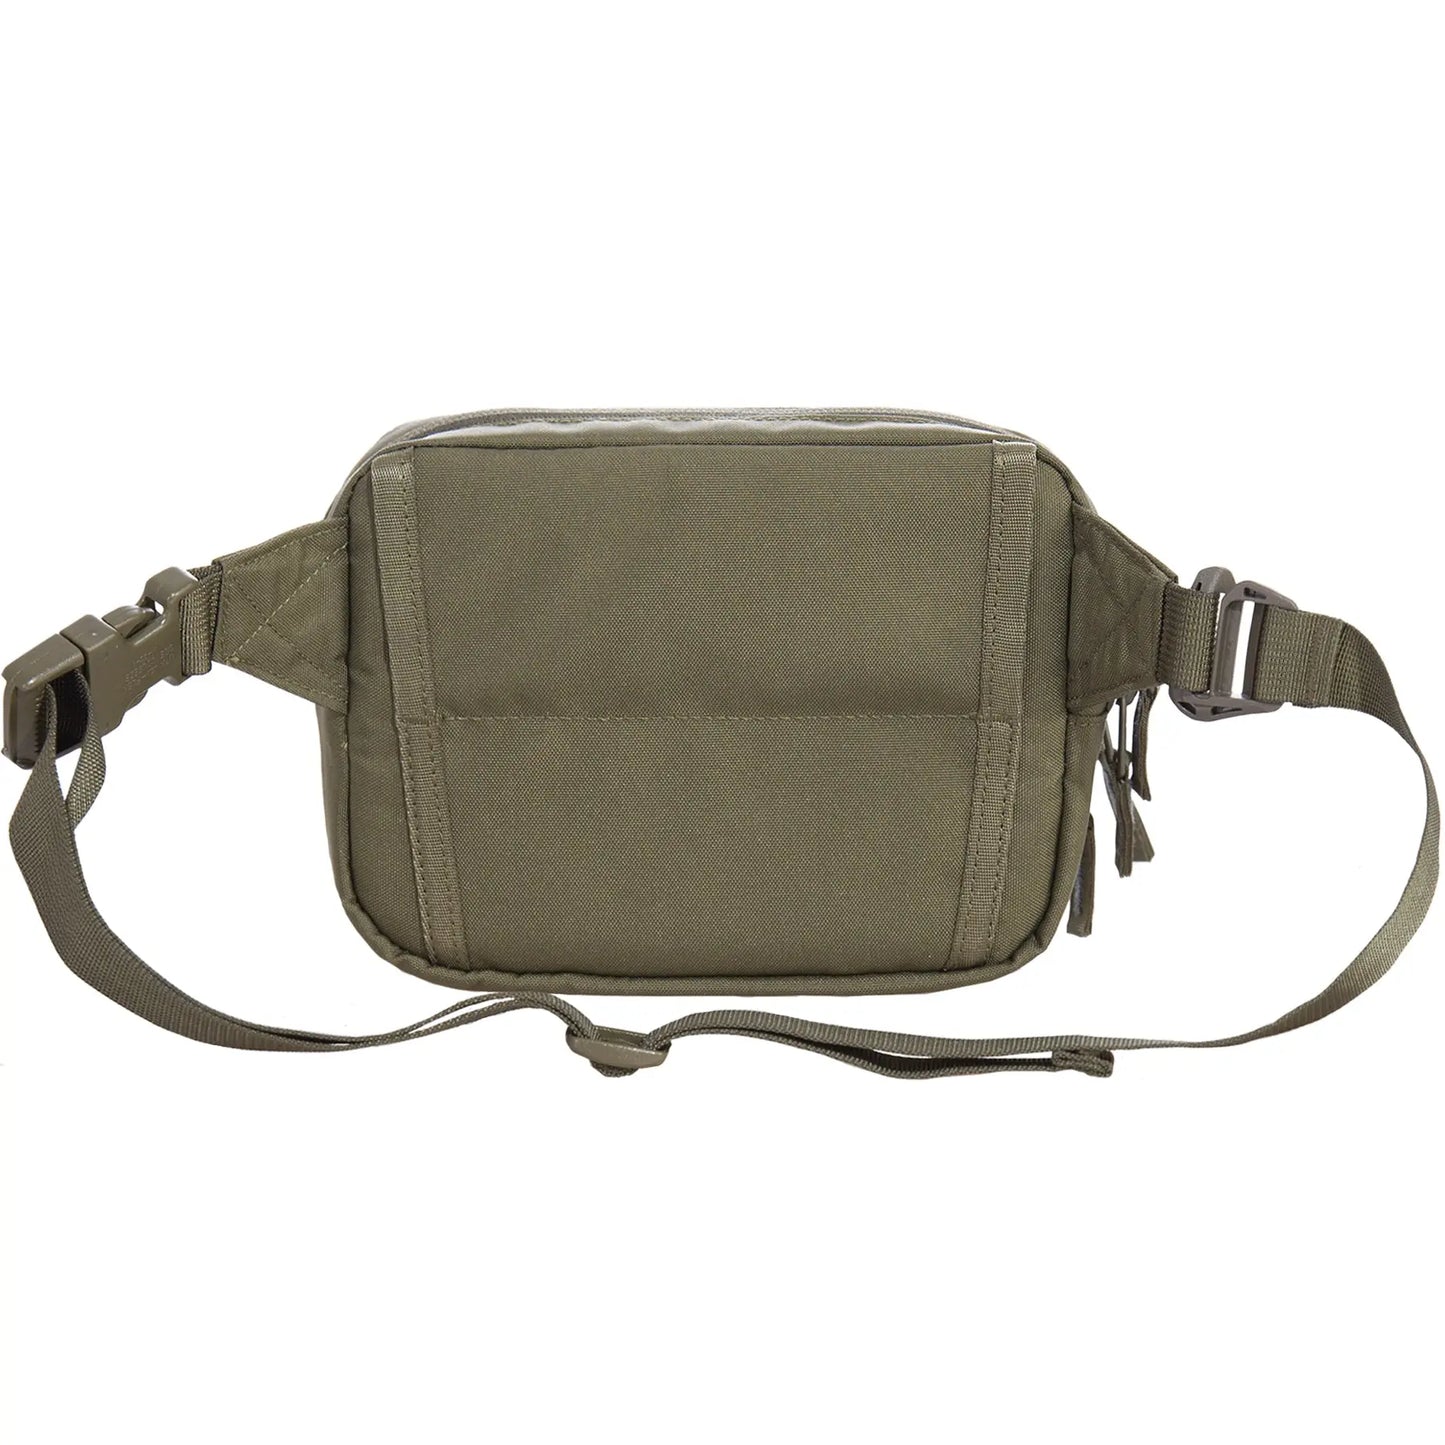 Protean Pouch NSO Gear